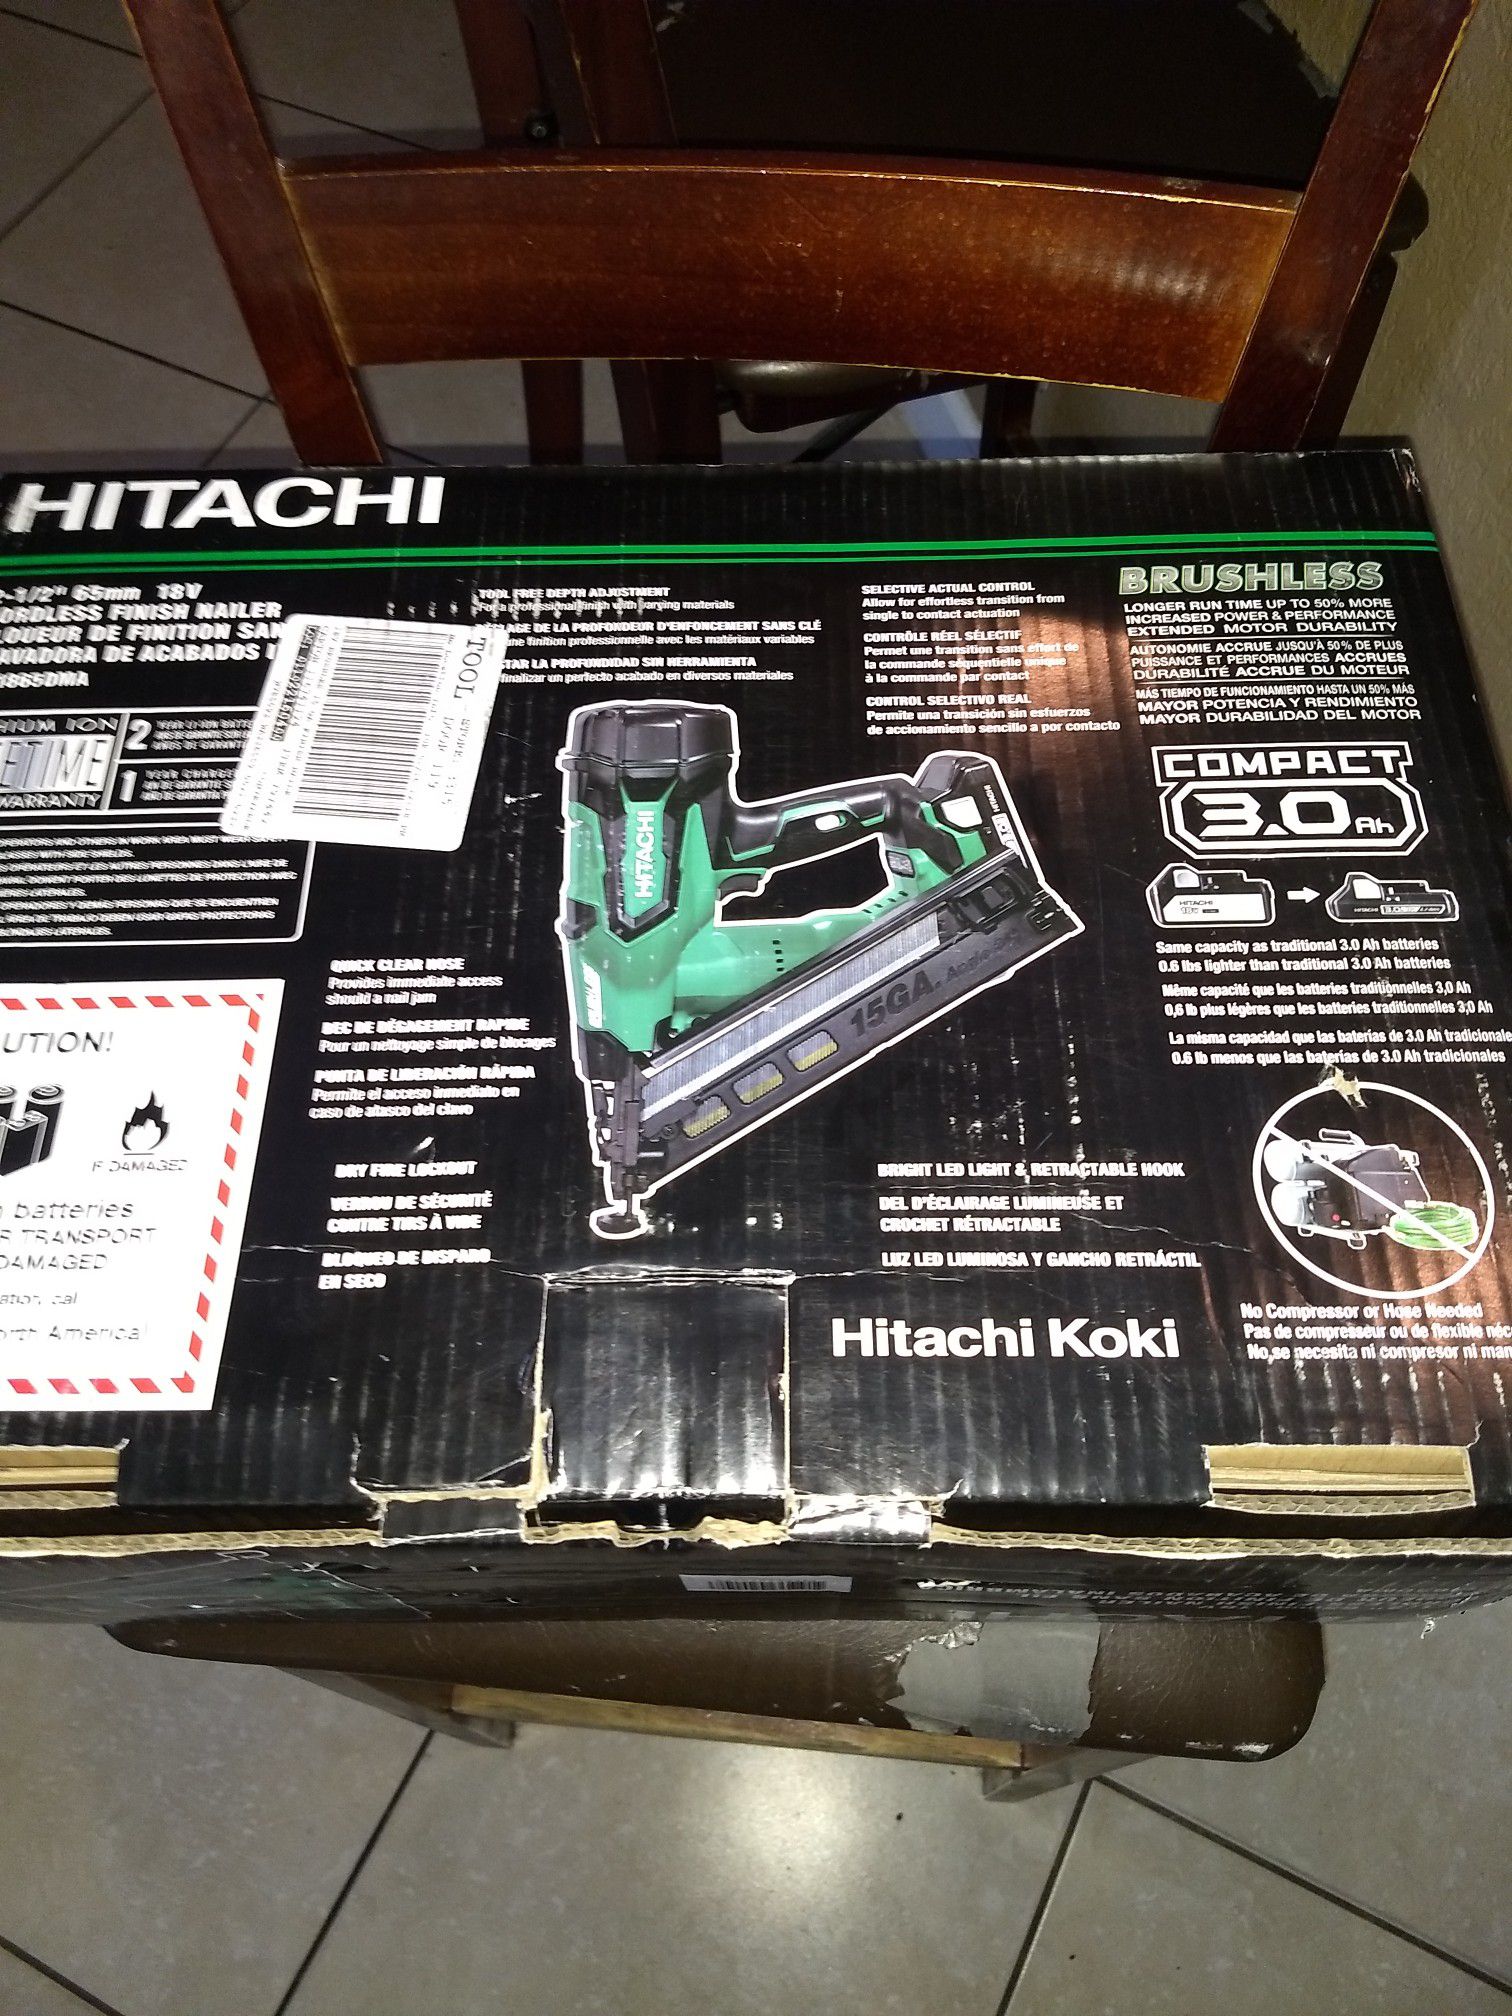 Hitachi cordless nailgun battery /charger included